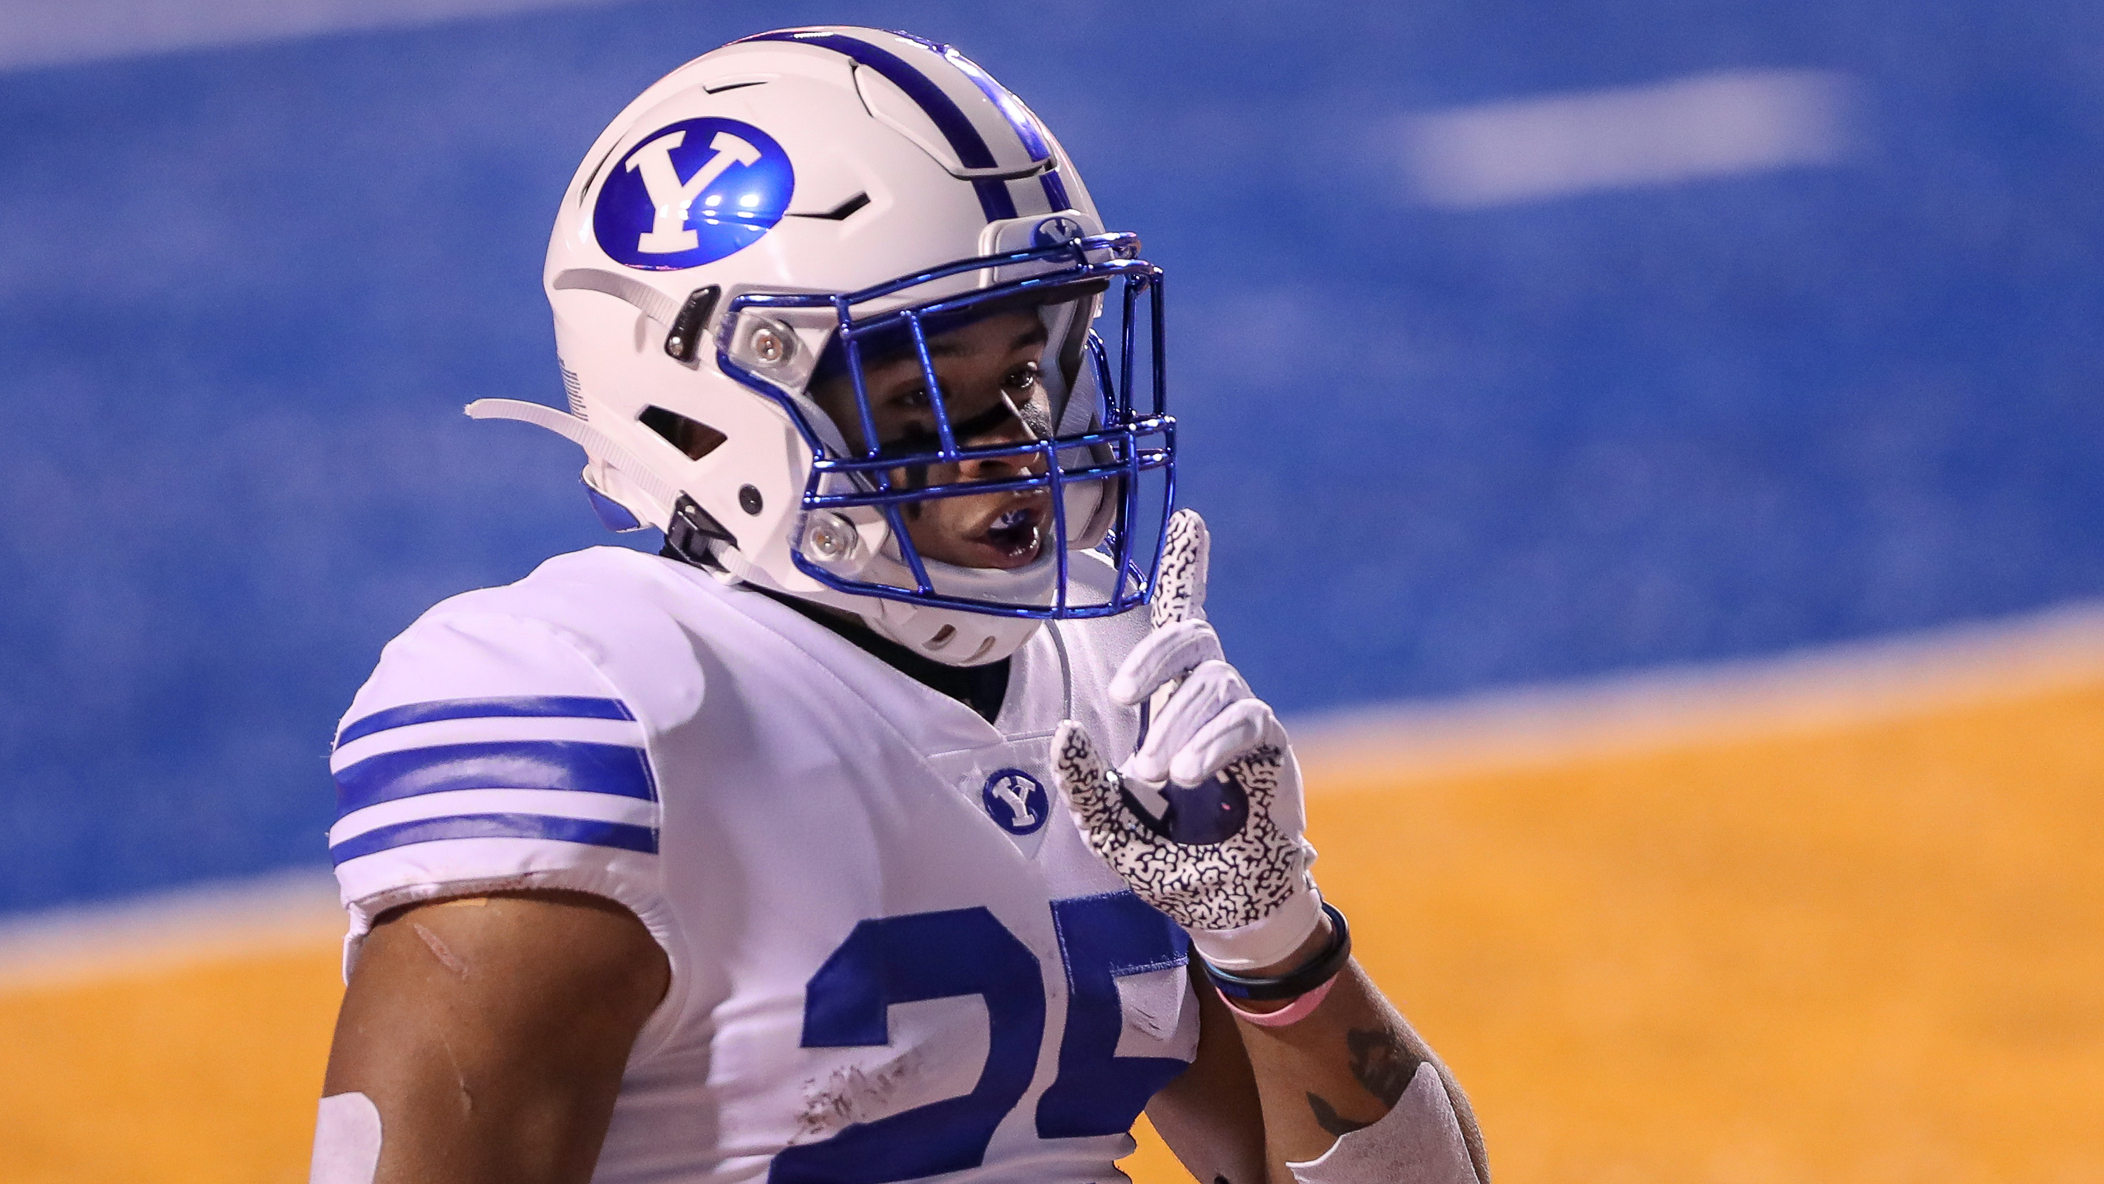 Byu Football / Rcwahtfrlxwom - Byu sports nation gives you a daily